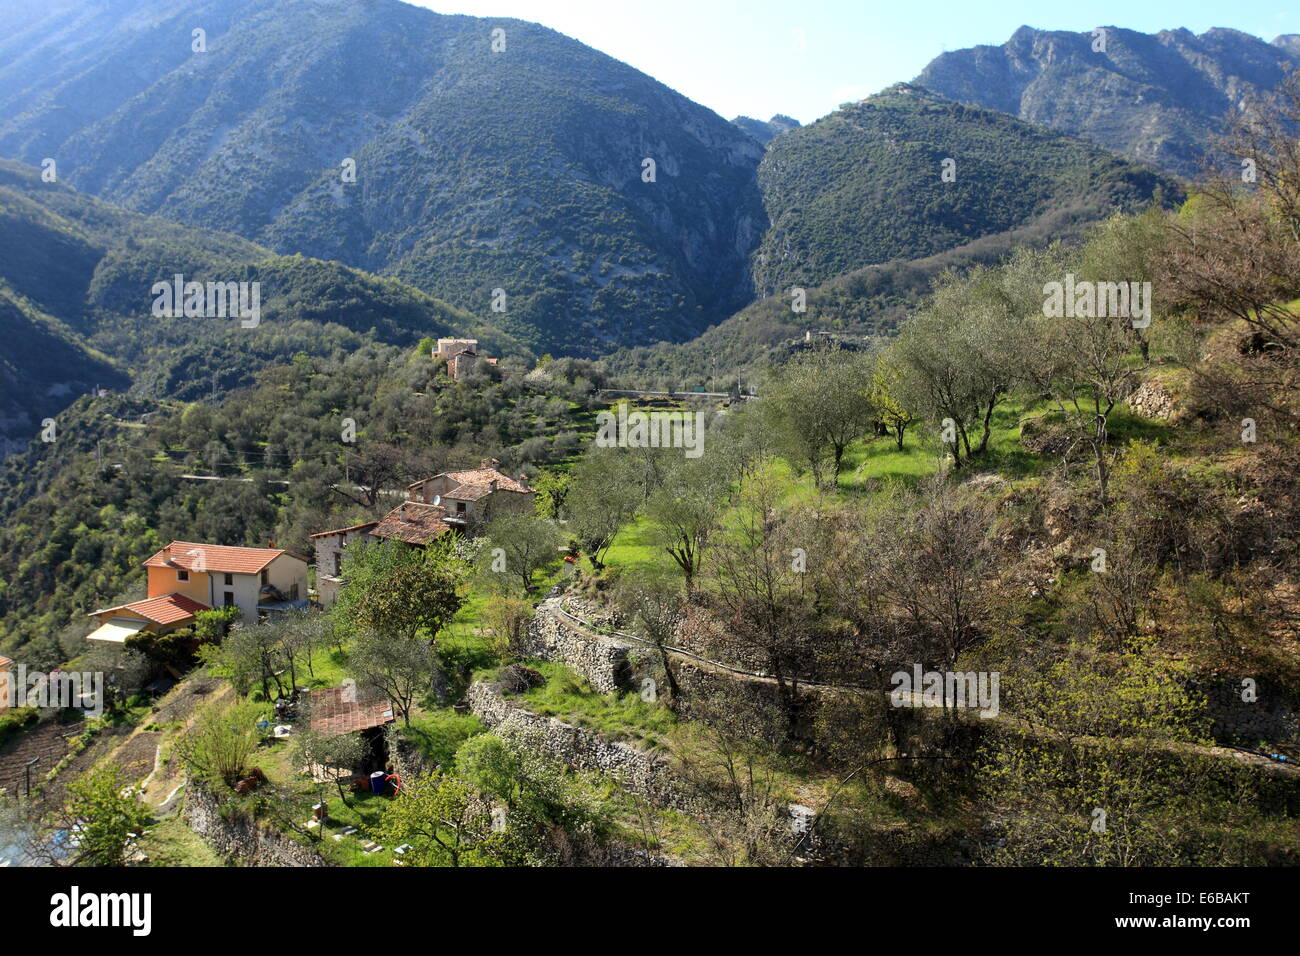 The Vesubie valley in the back country of the Alpes-Maritimes with the picturesque olive tree field. Stock Photo